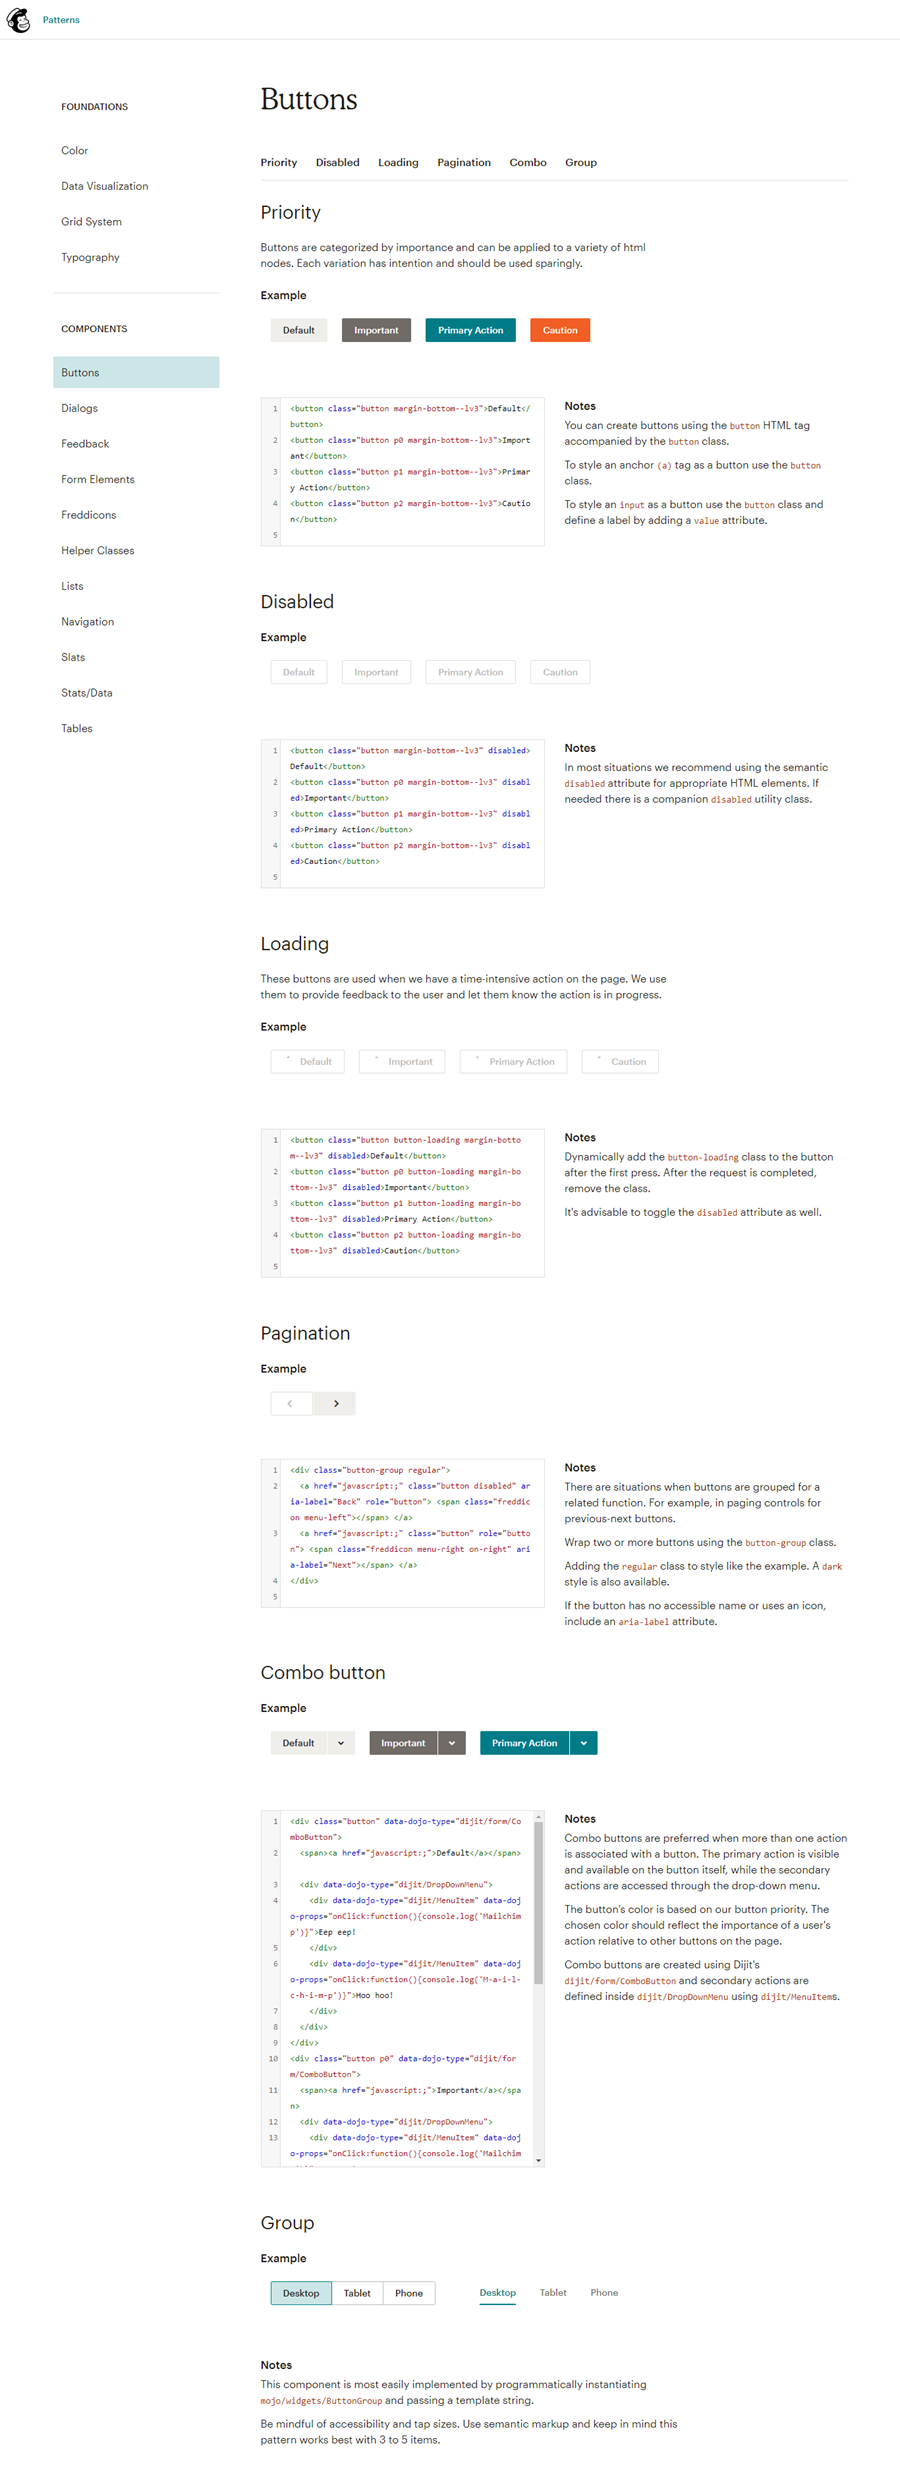 mailchimp buttons style guide example